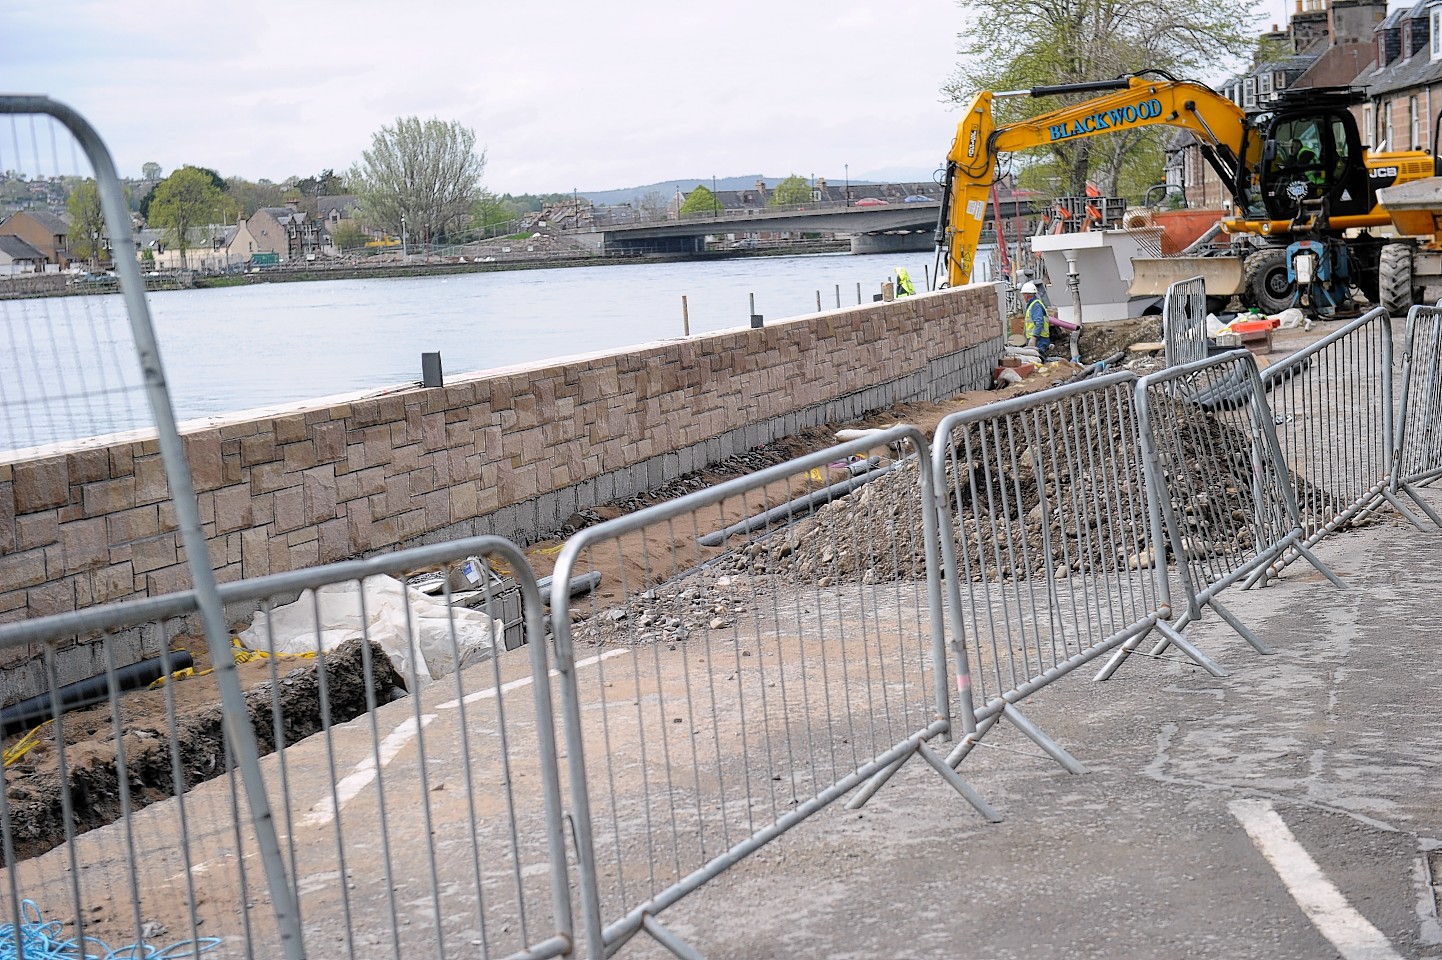 Work on the Inverness flood scheme was late and over budget.